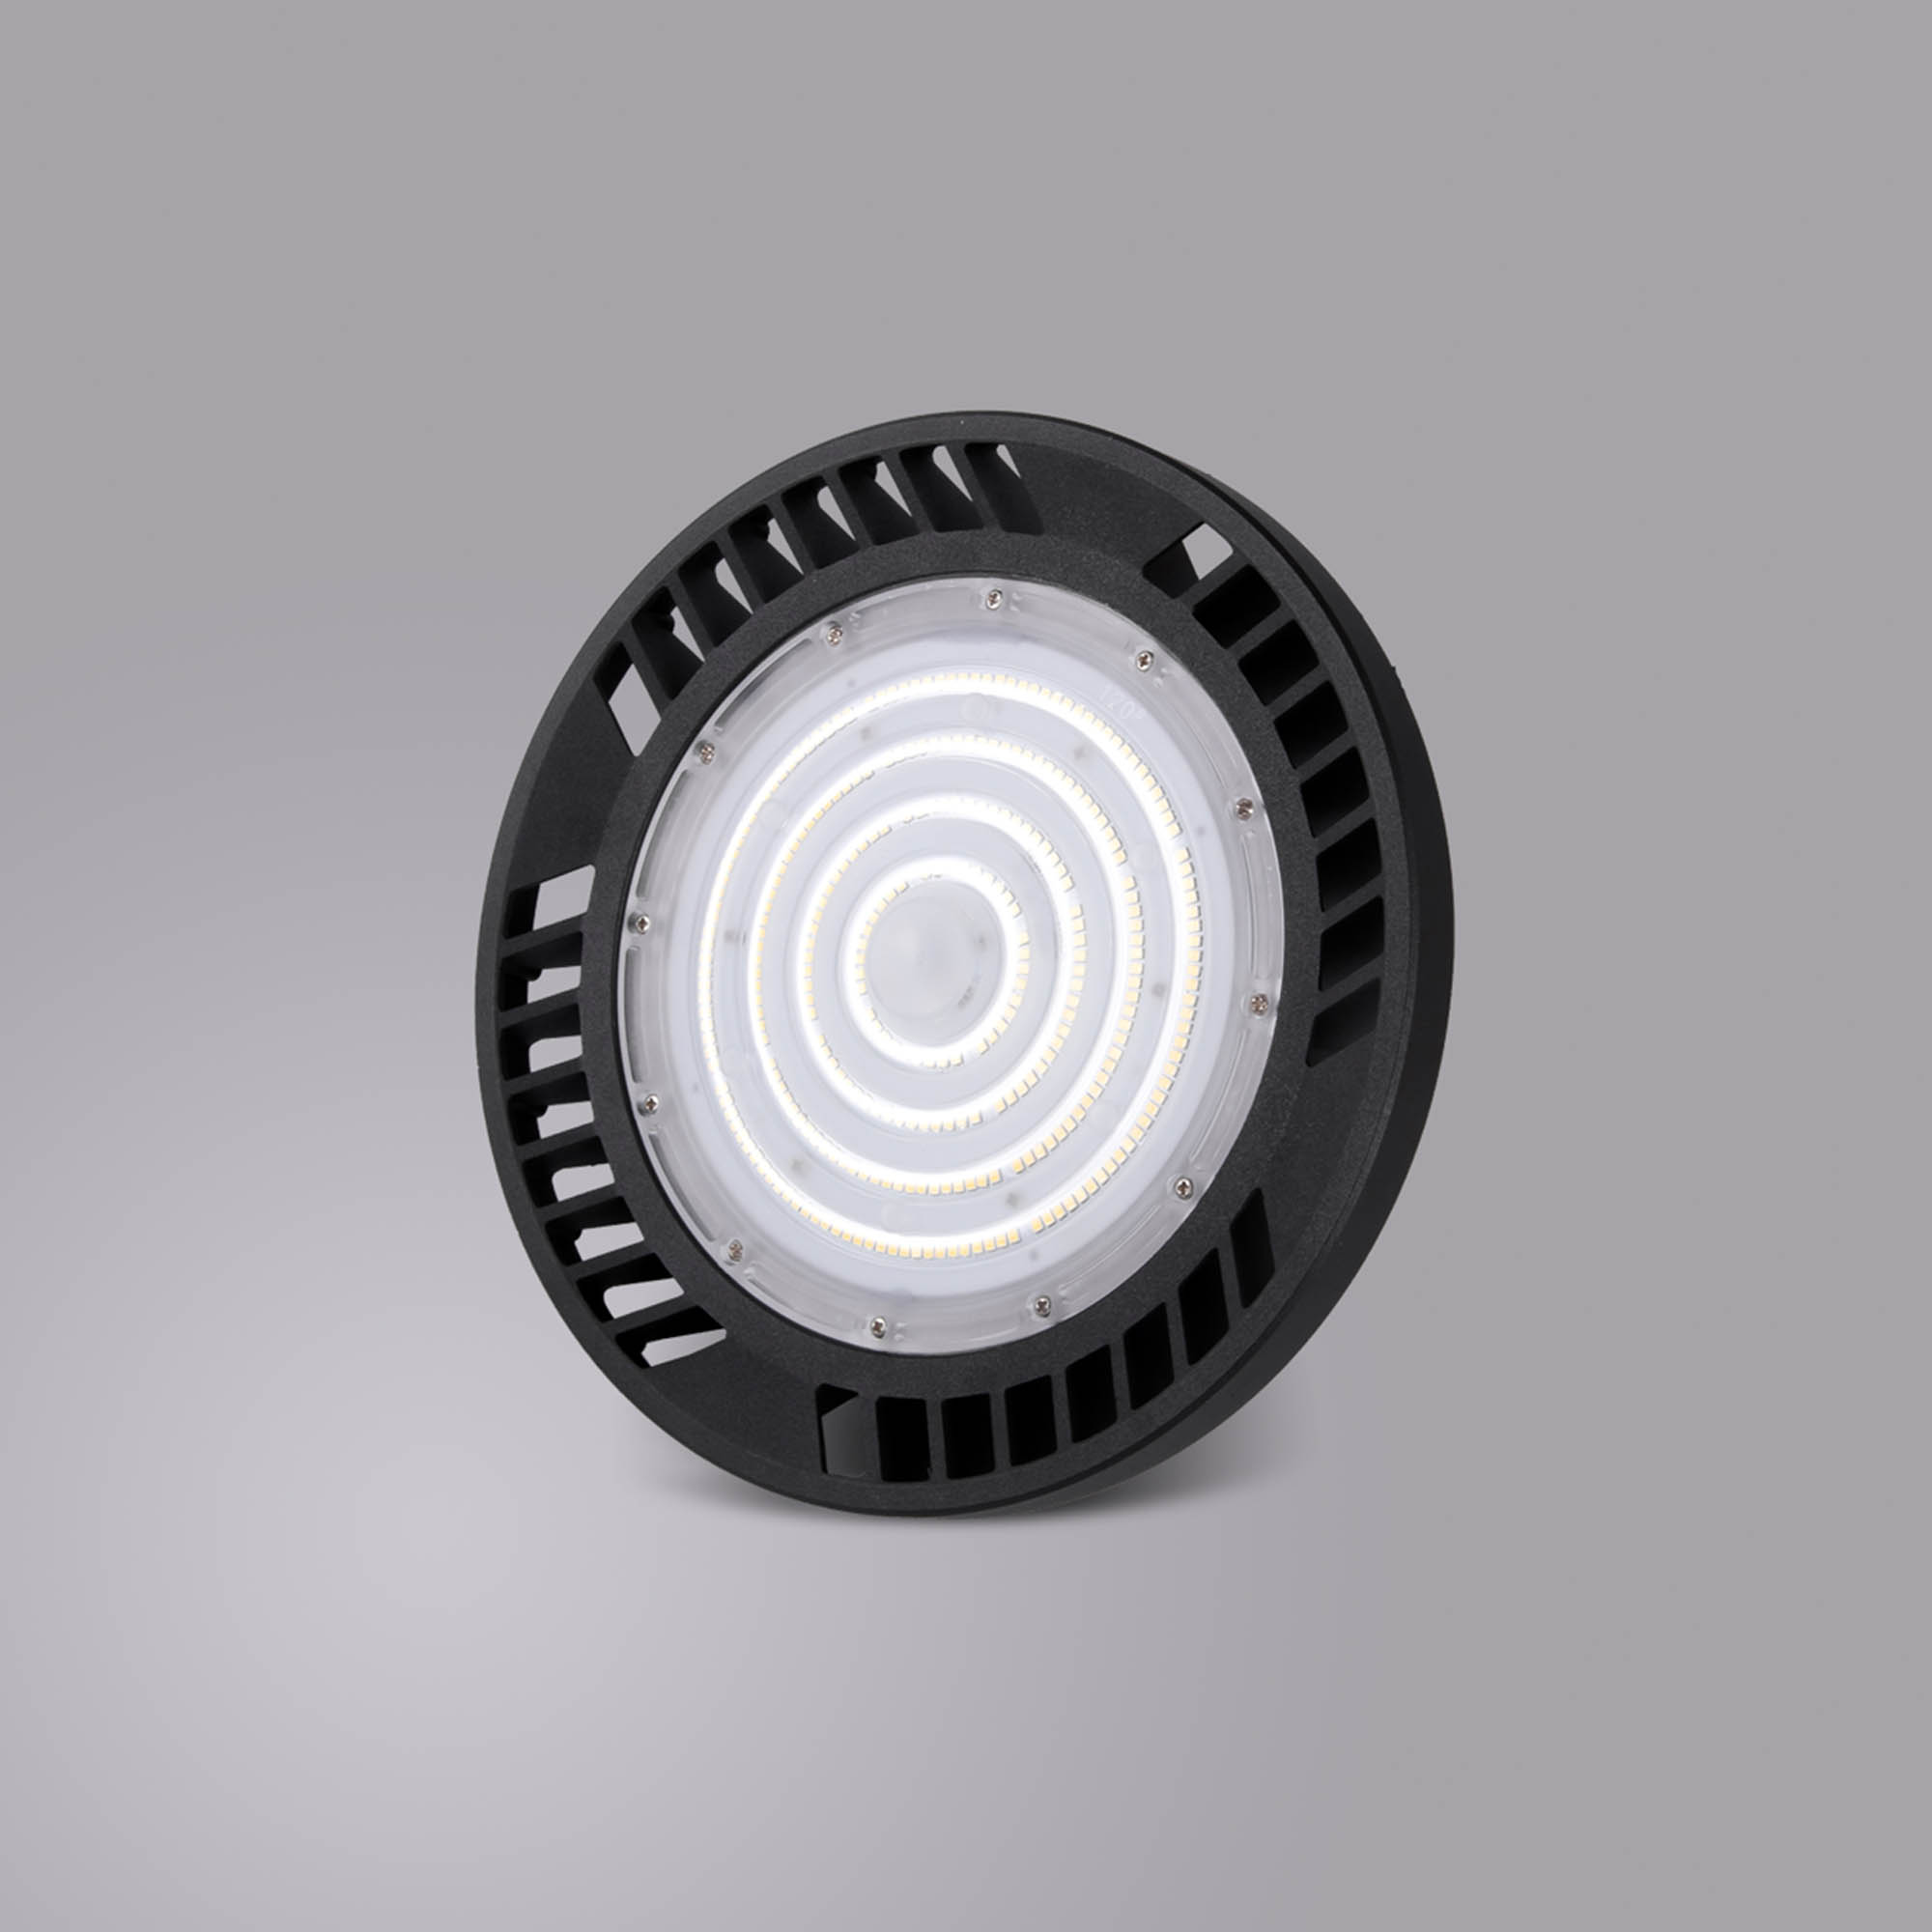 Urano Ceiling Lights Mantra Fusion Surface Spot Lights